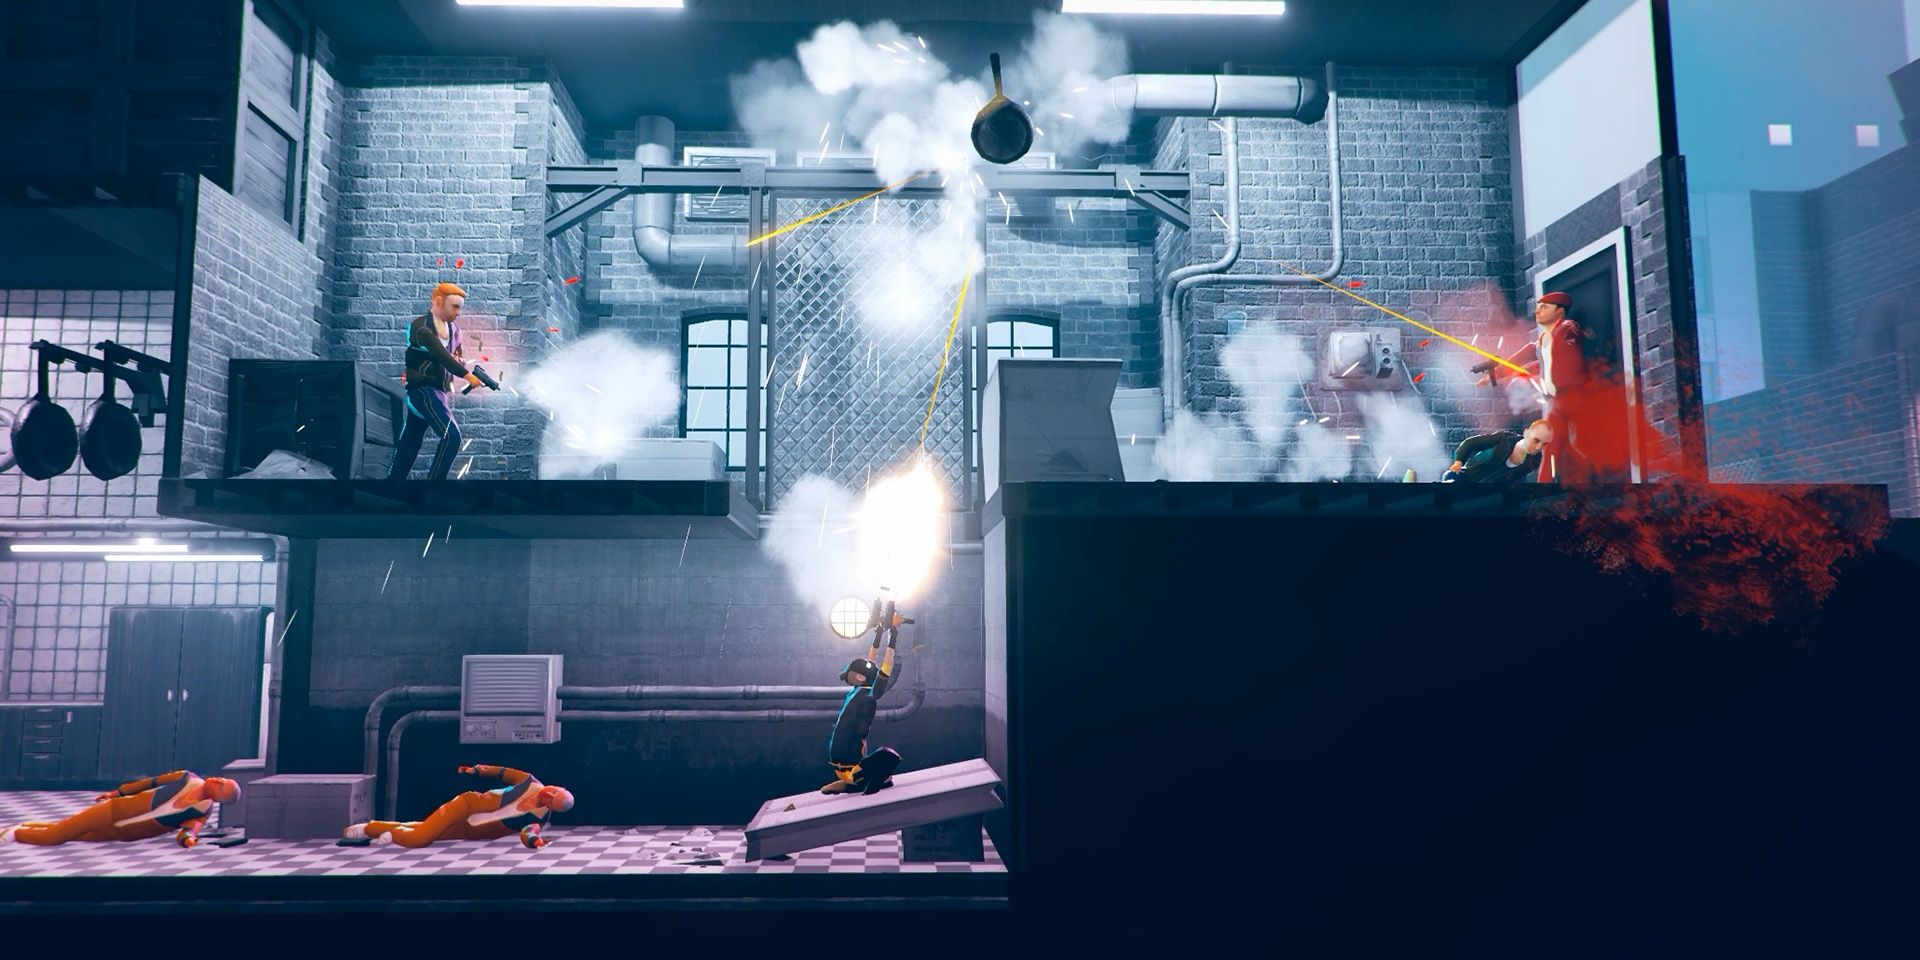 A screenshot showing gameplay in My Friend Pedro